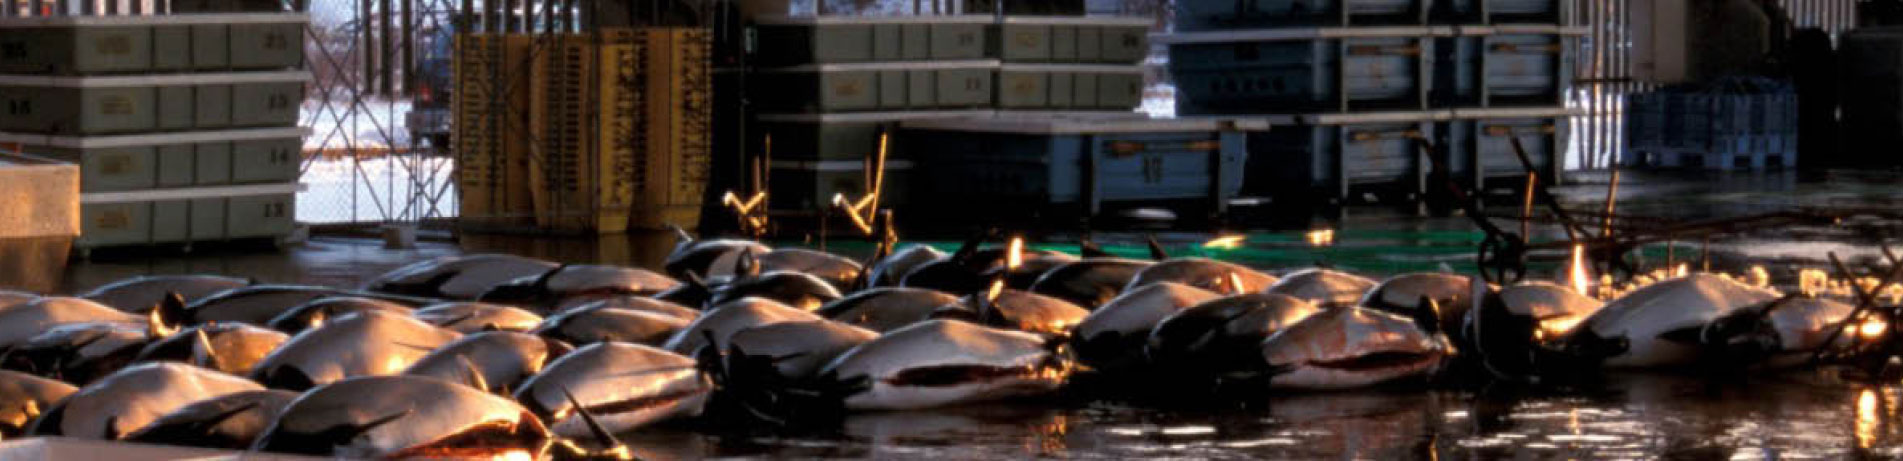 Dall's porpoises arranged in rows after hunt, Japan